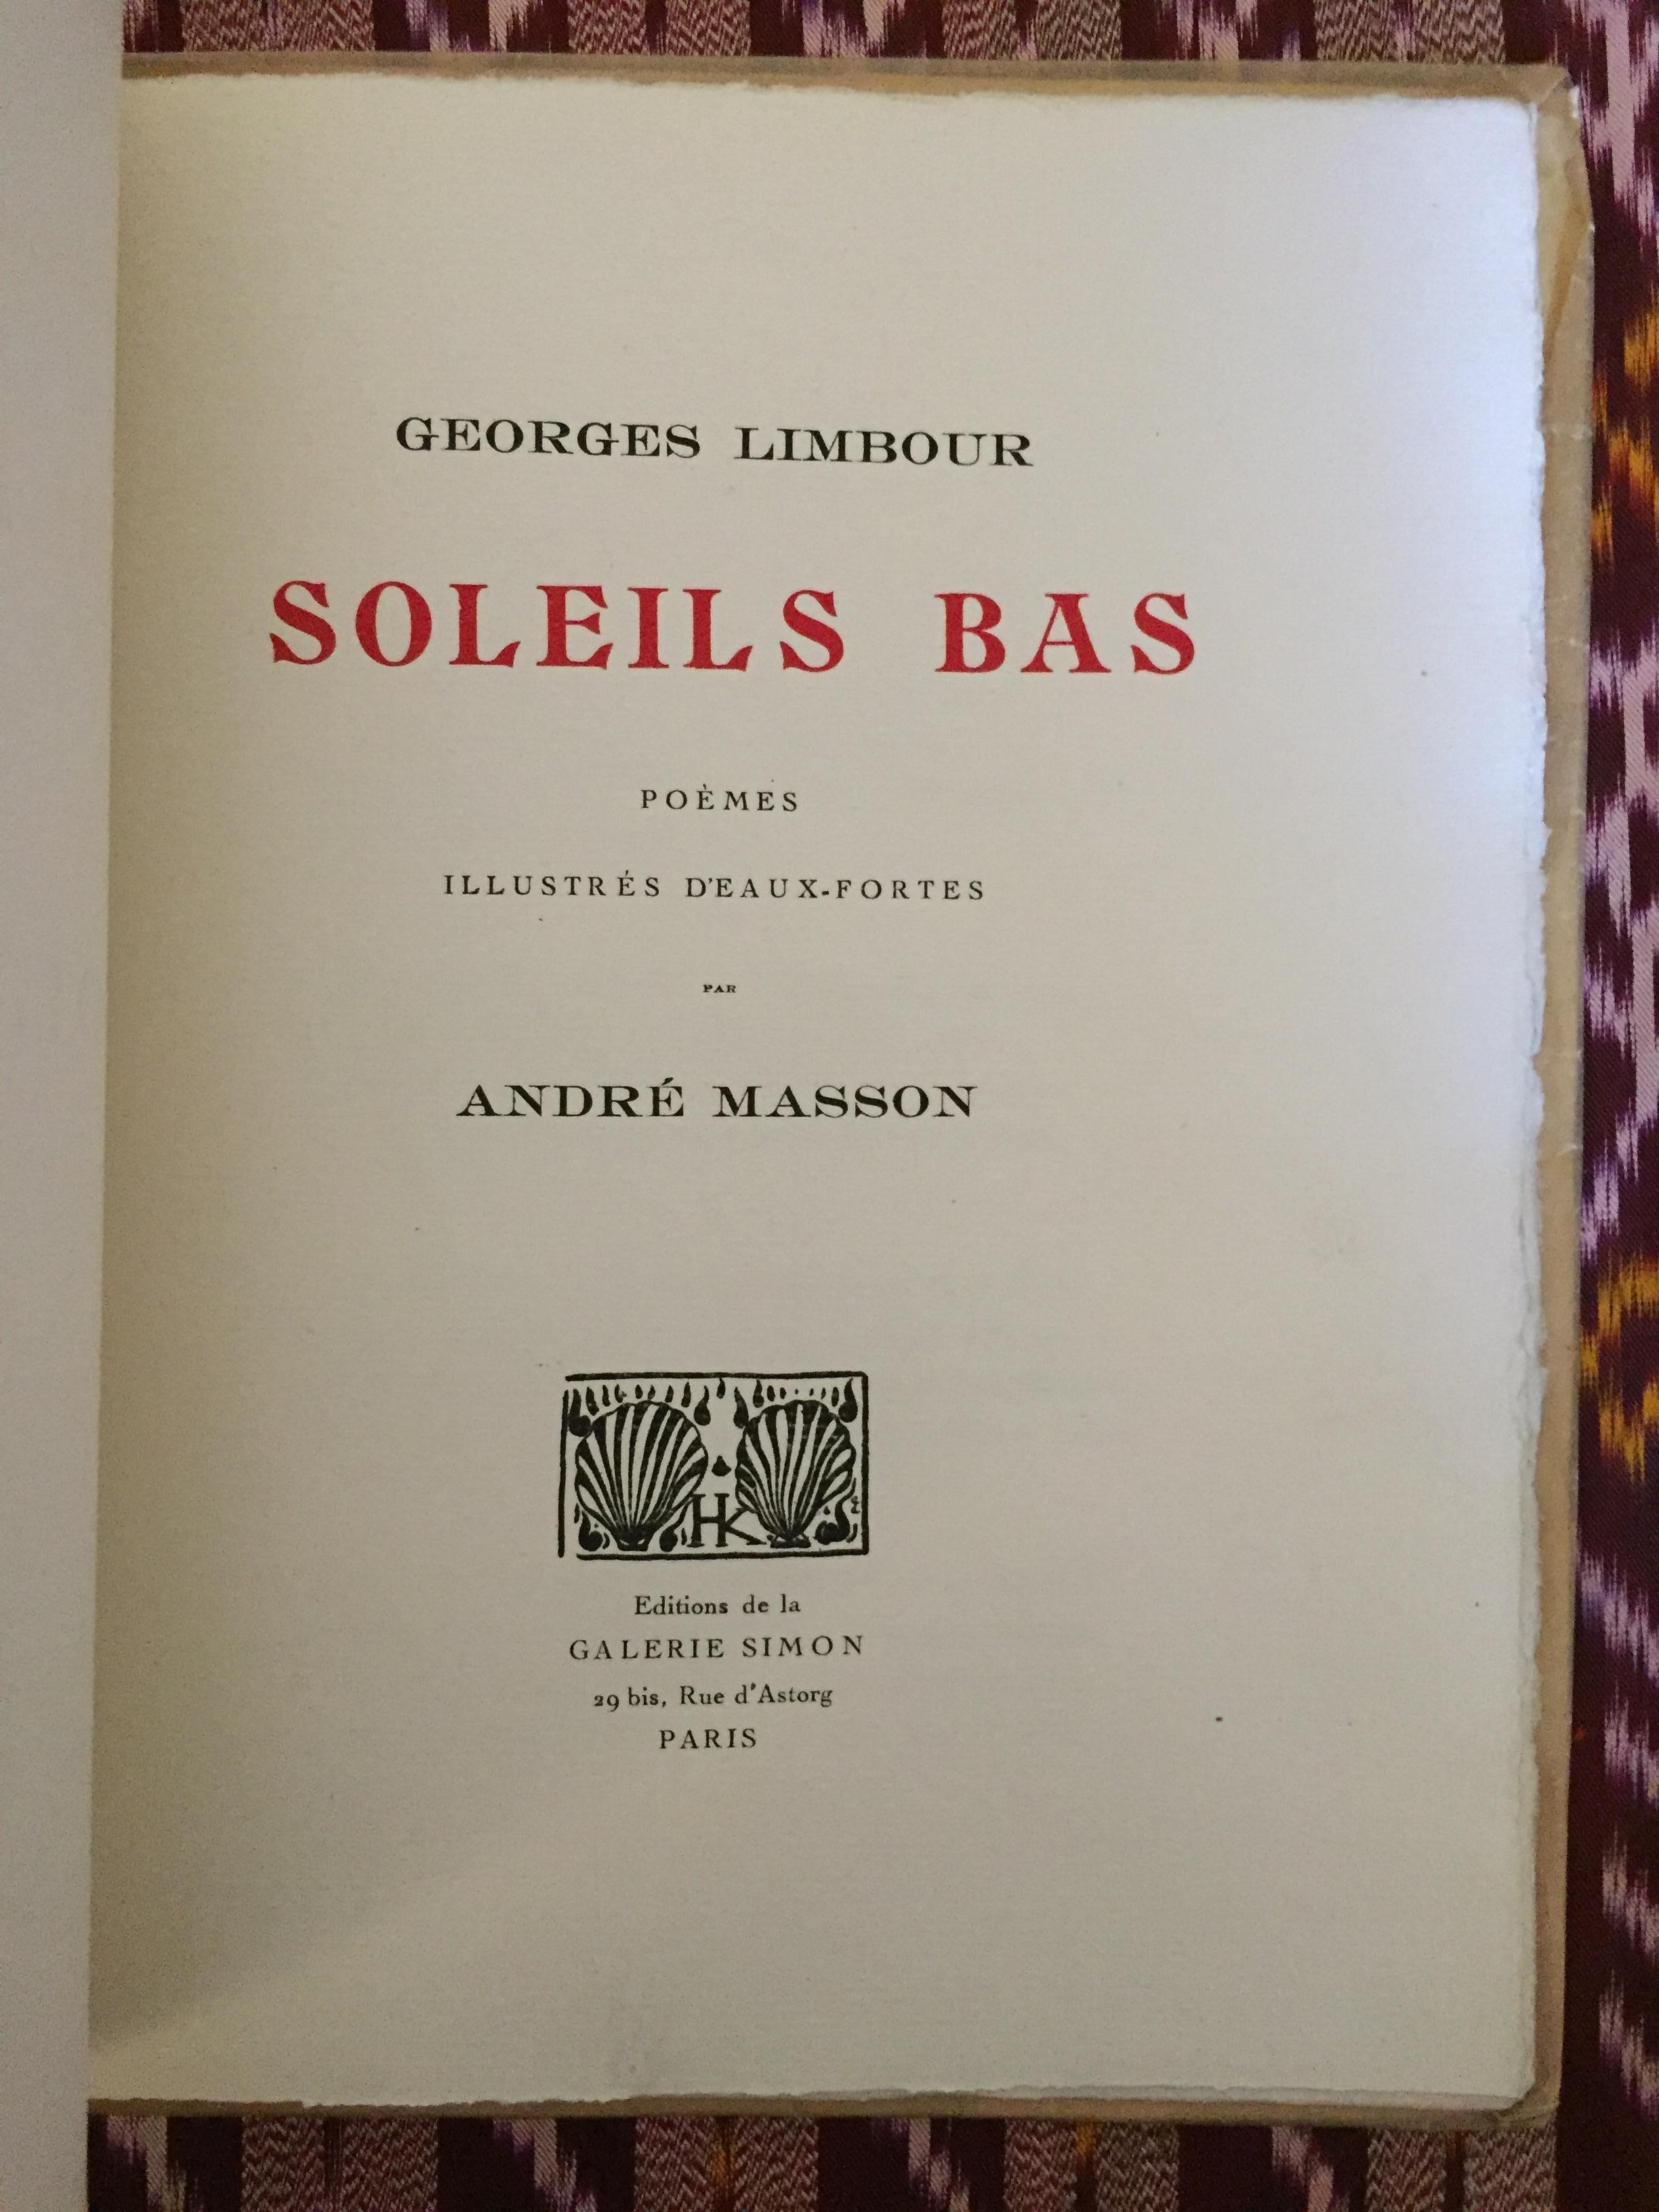 Soleil bas - Rare Illustrated Book by André Masson - 1924 - Surrealist Art by André Masson, Georges Limbour